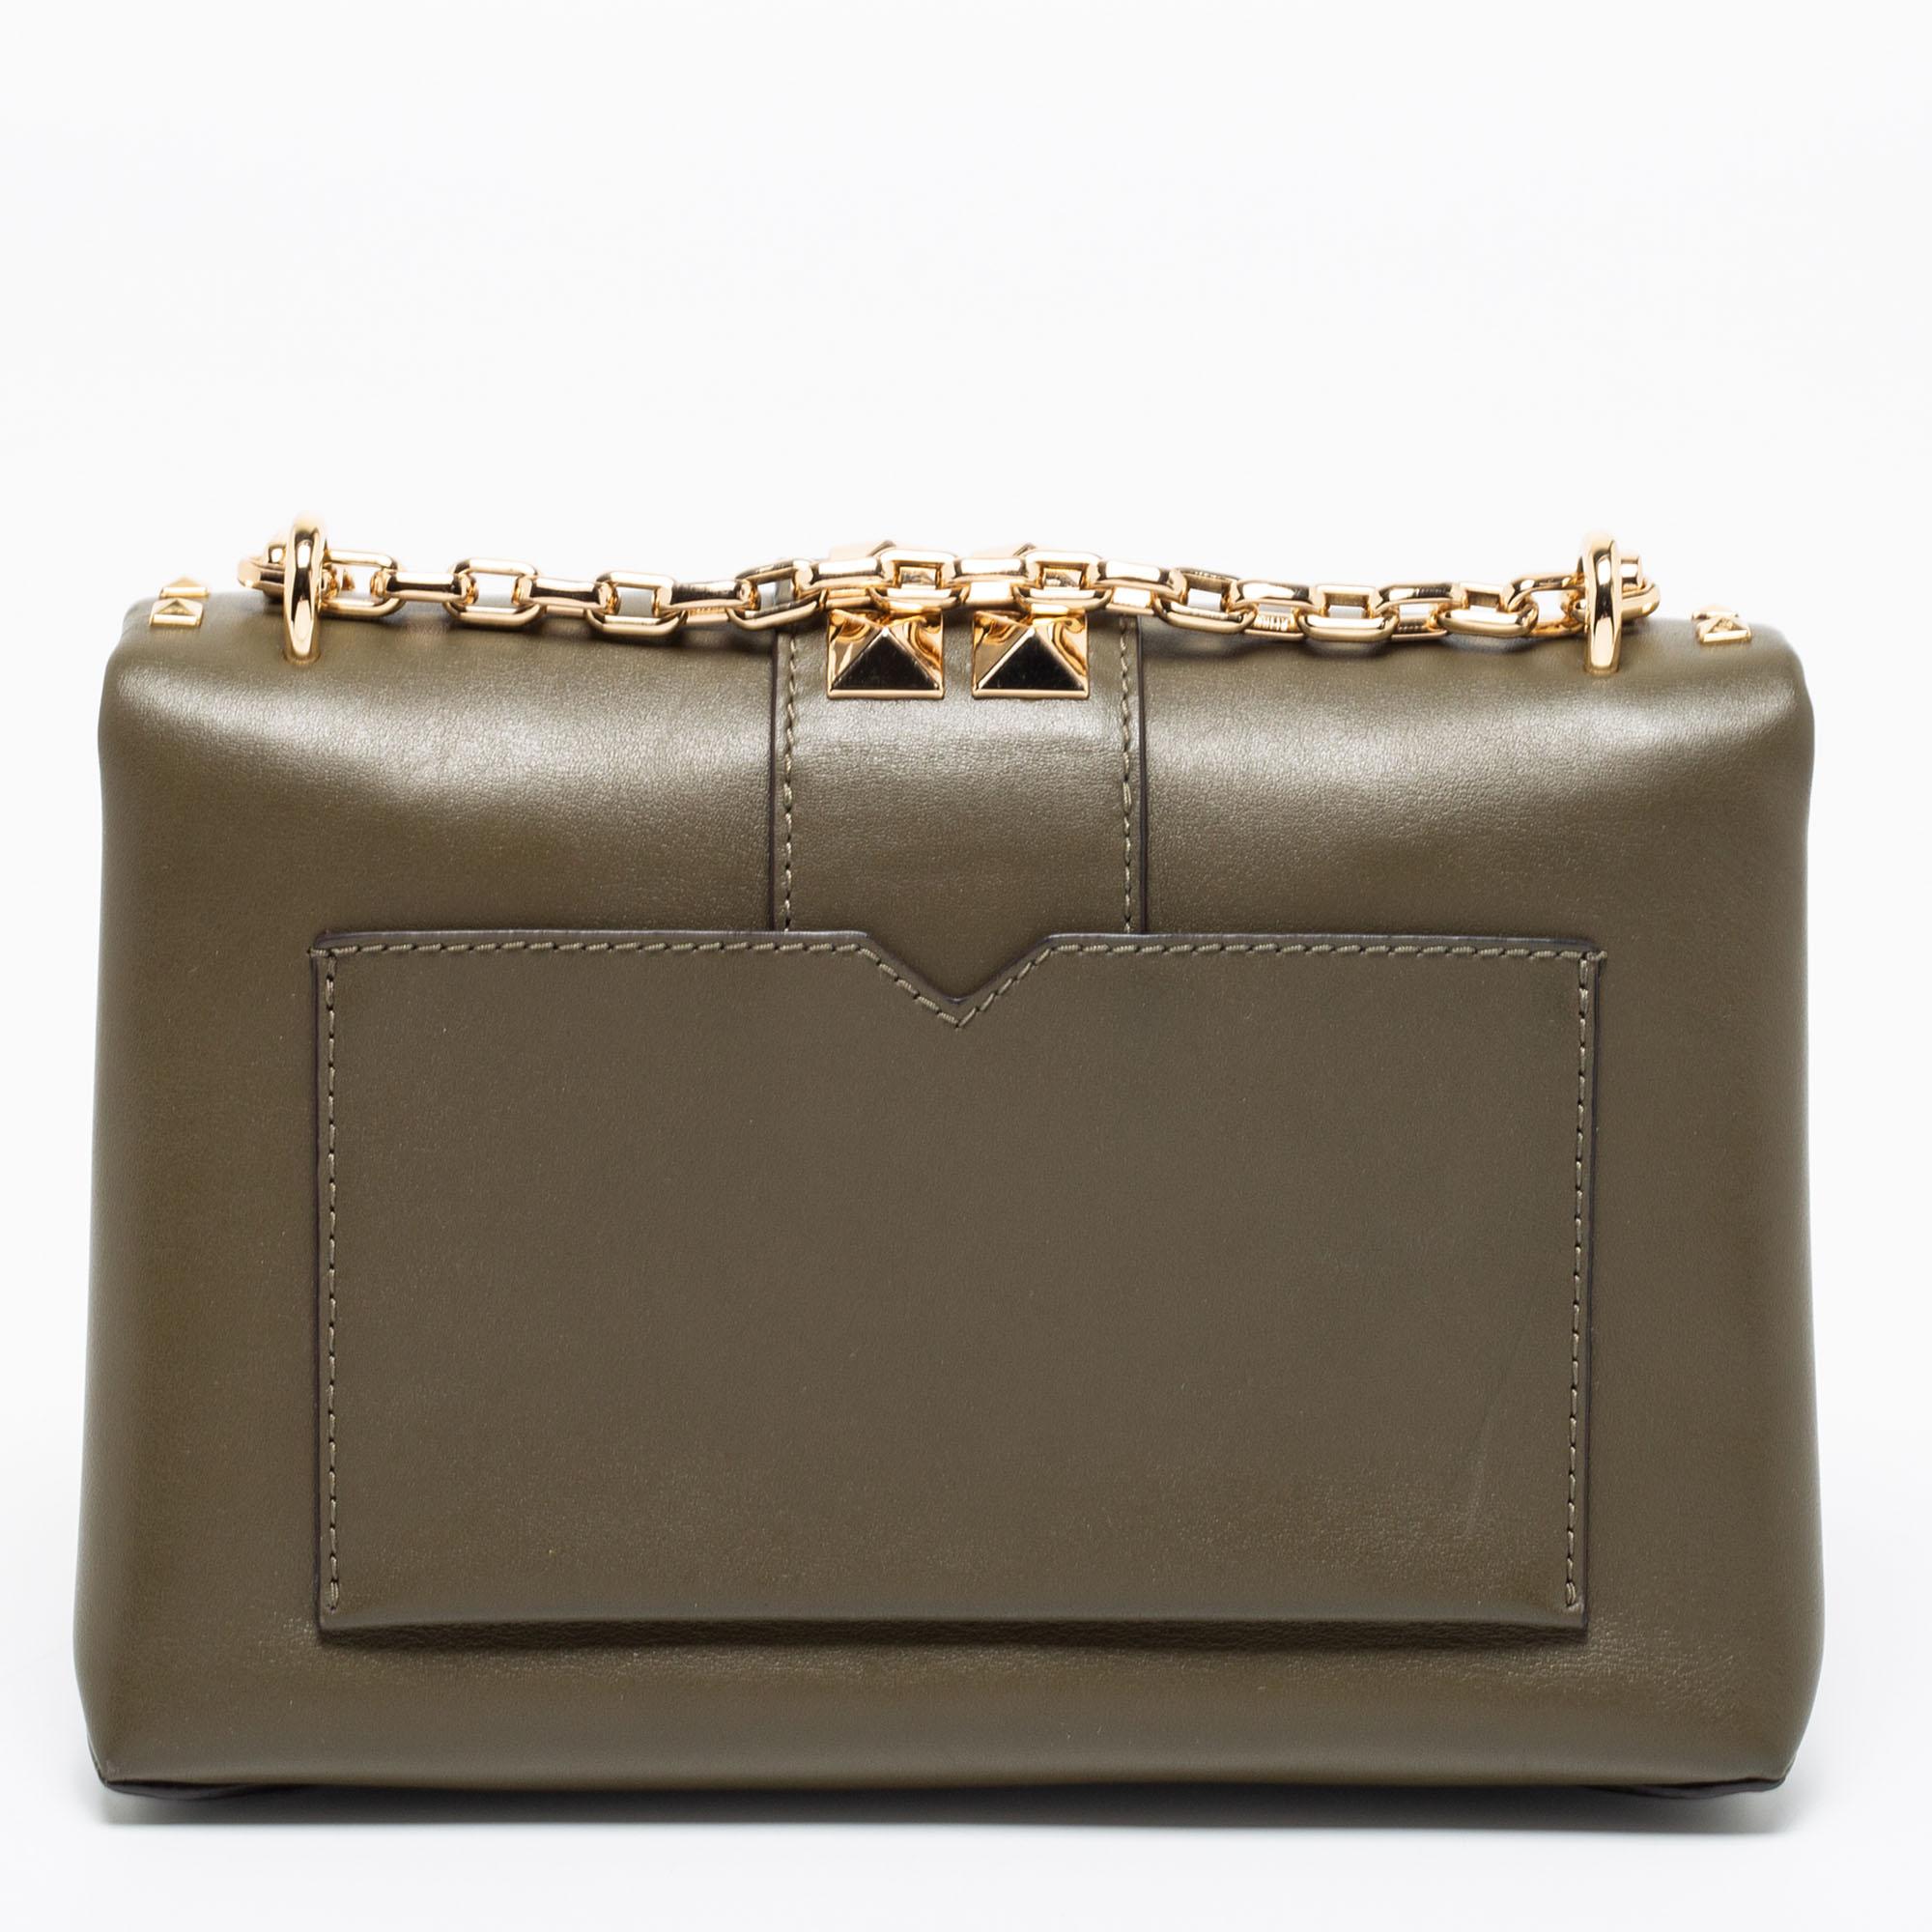 This Michael Kors shoulder bag represents the label's contemporary and classy attributes. It is made from leather in a classy green shade with gold-tone studs on the exterior. The bag is complete with a shoulder chain.

Includes: Original Dustbag,